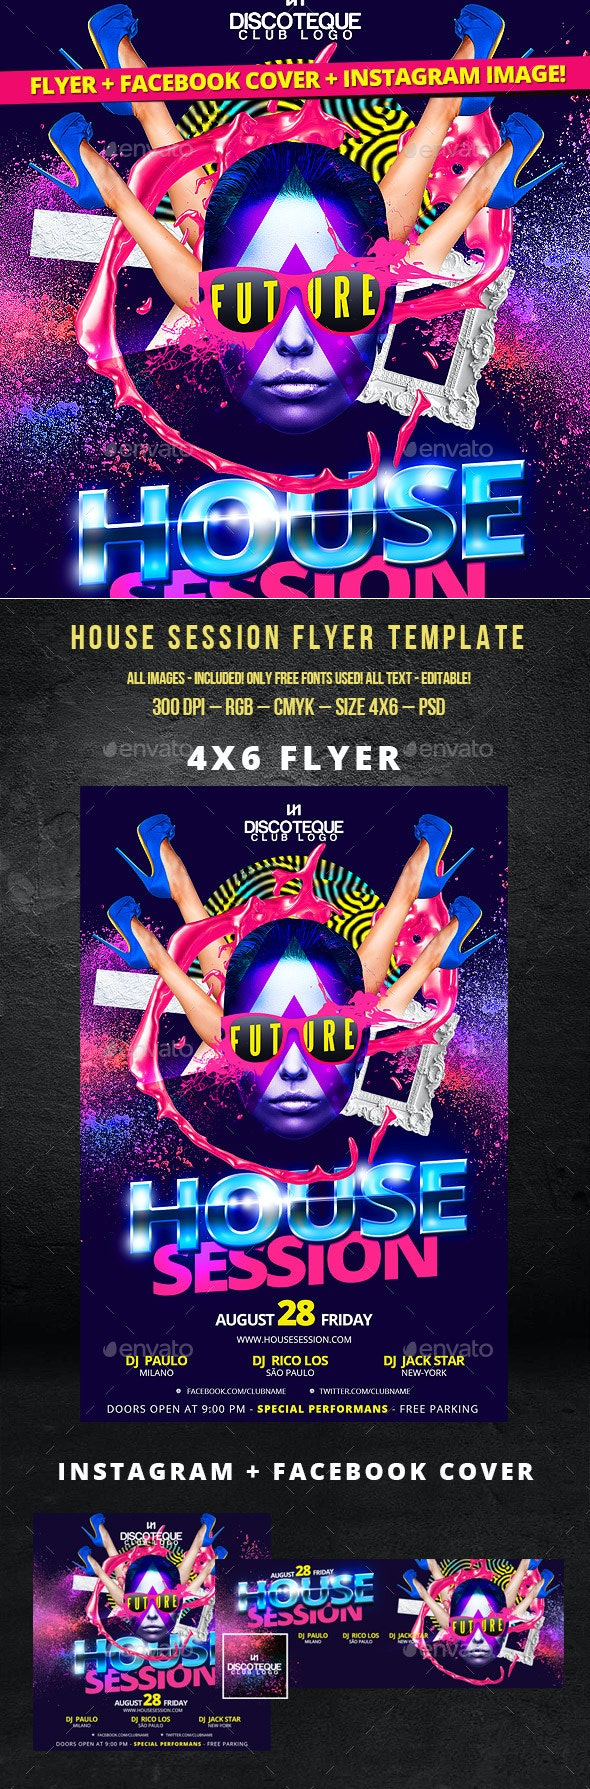 Party Flyer Templates Free